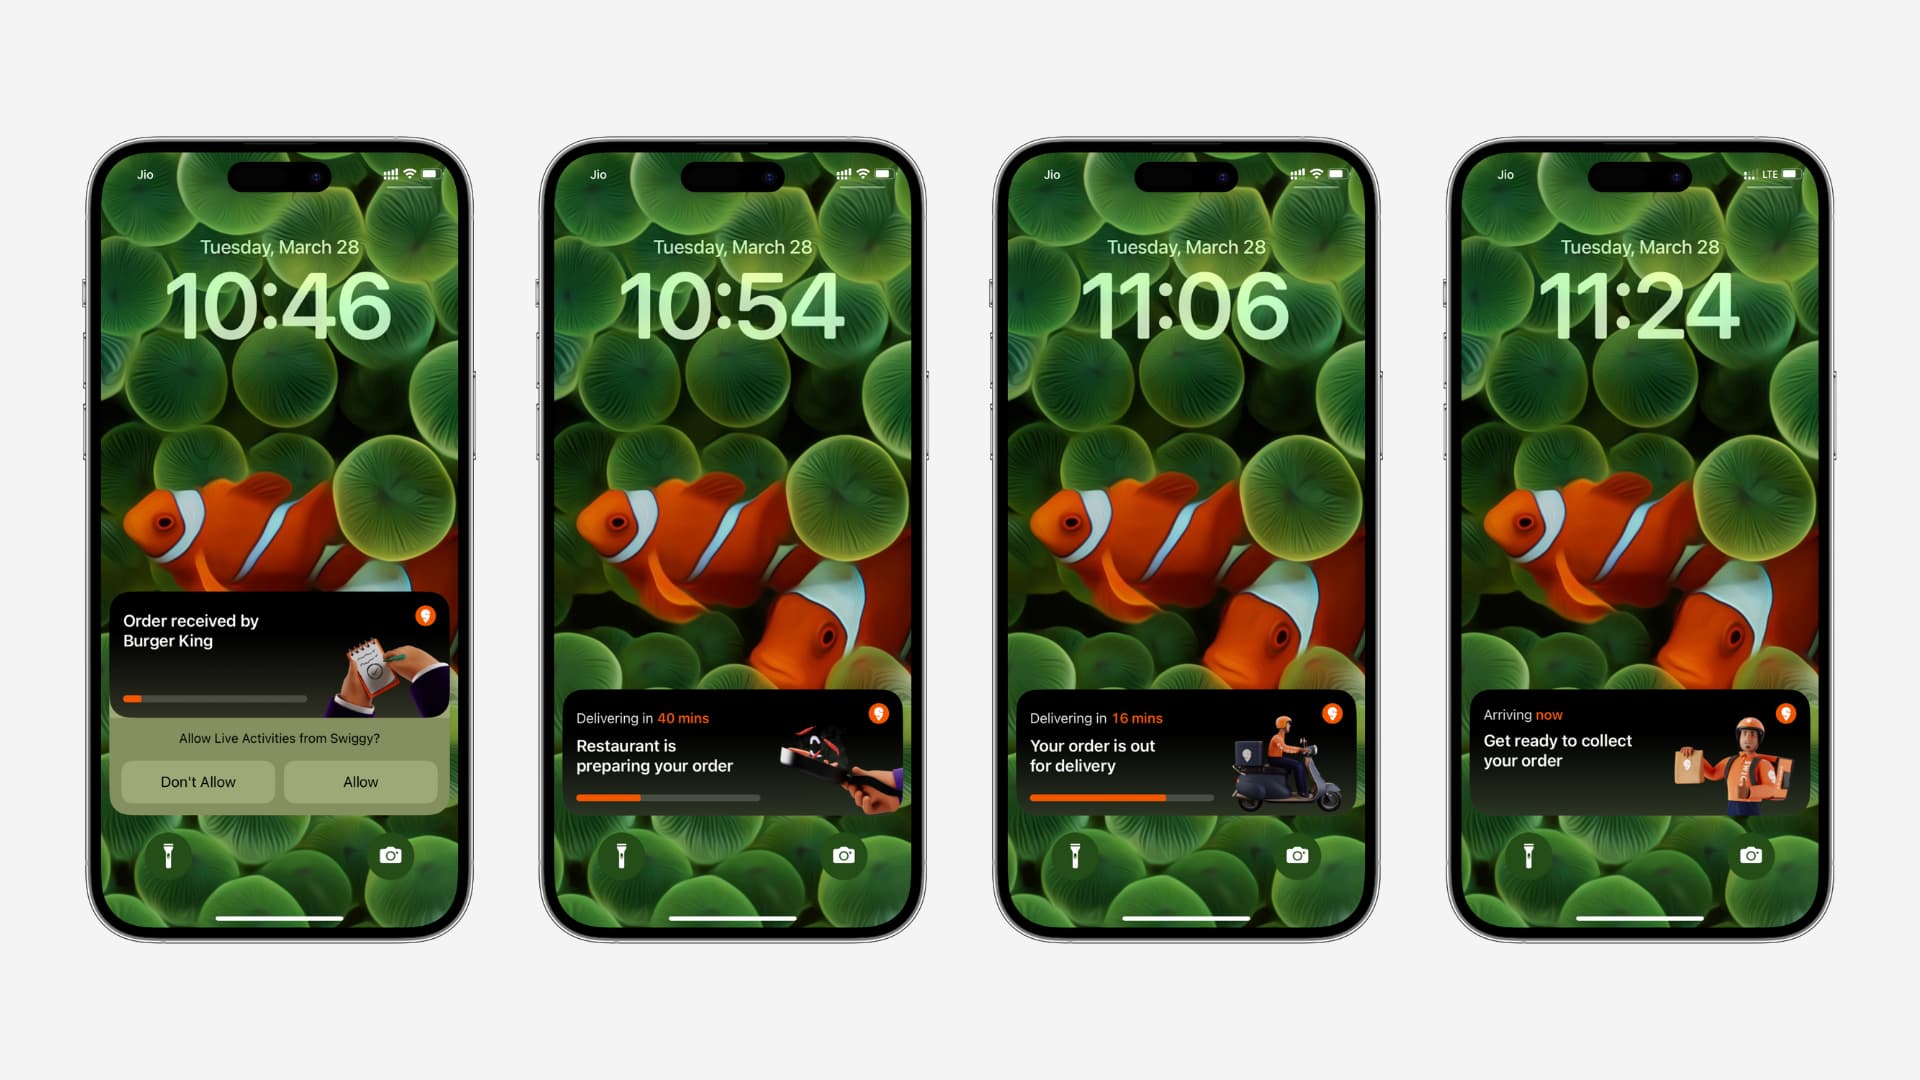 Four iPhone screenshot mockups showing Live Activities in action on the Lock Screen